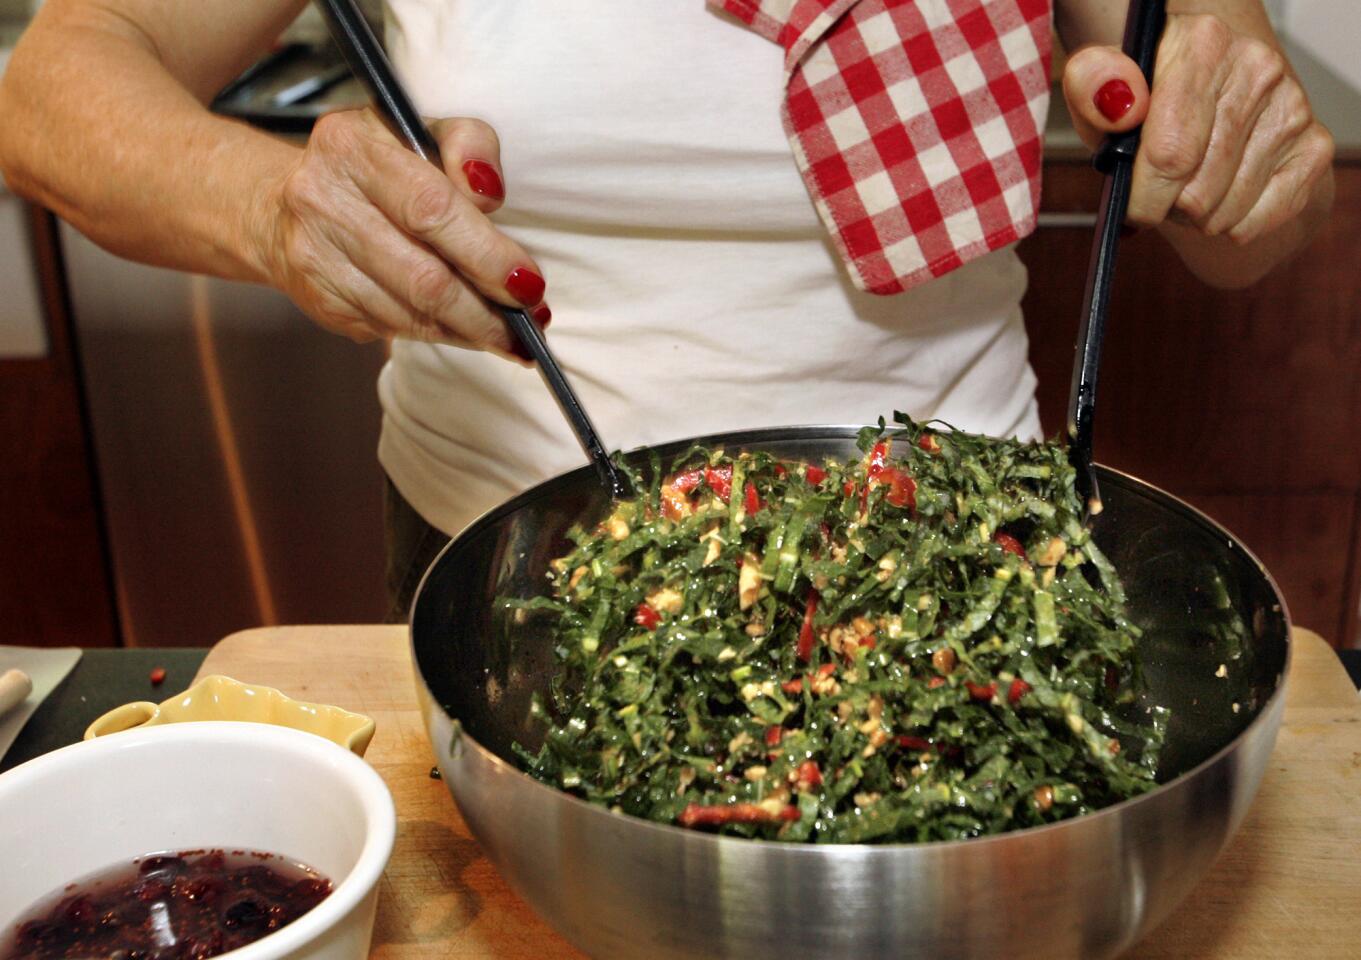 Kale salad with cranberries and walnuts